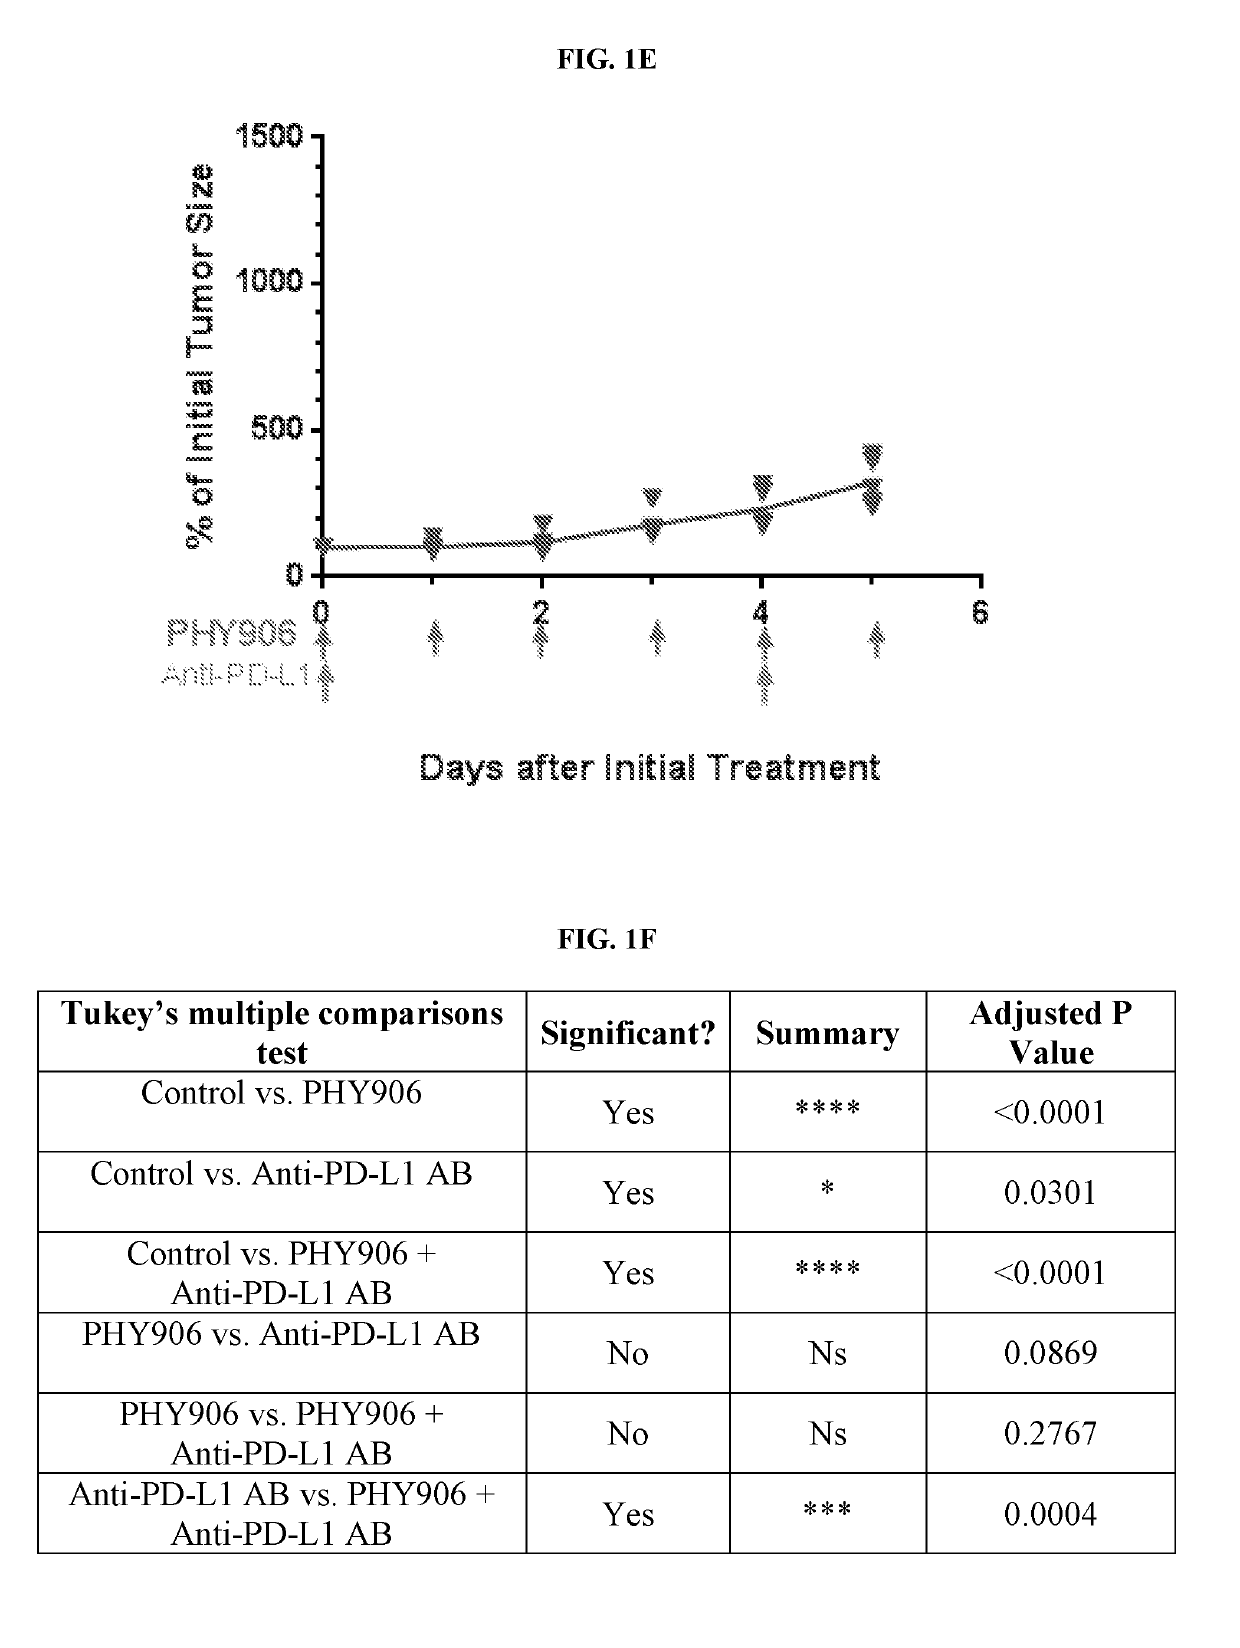 Improved Therapeutic Index of Anti-Immune Checkpoint Inhibitors Using Combination Therapy Comprising A PHY906 Extract, A Scutellaria baicalensis Georgi (S) Extract or A Compound From Such Extracts